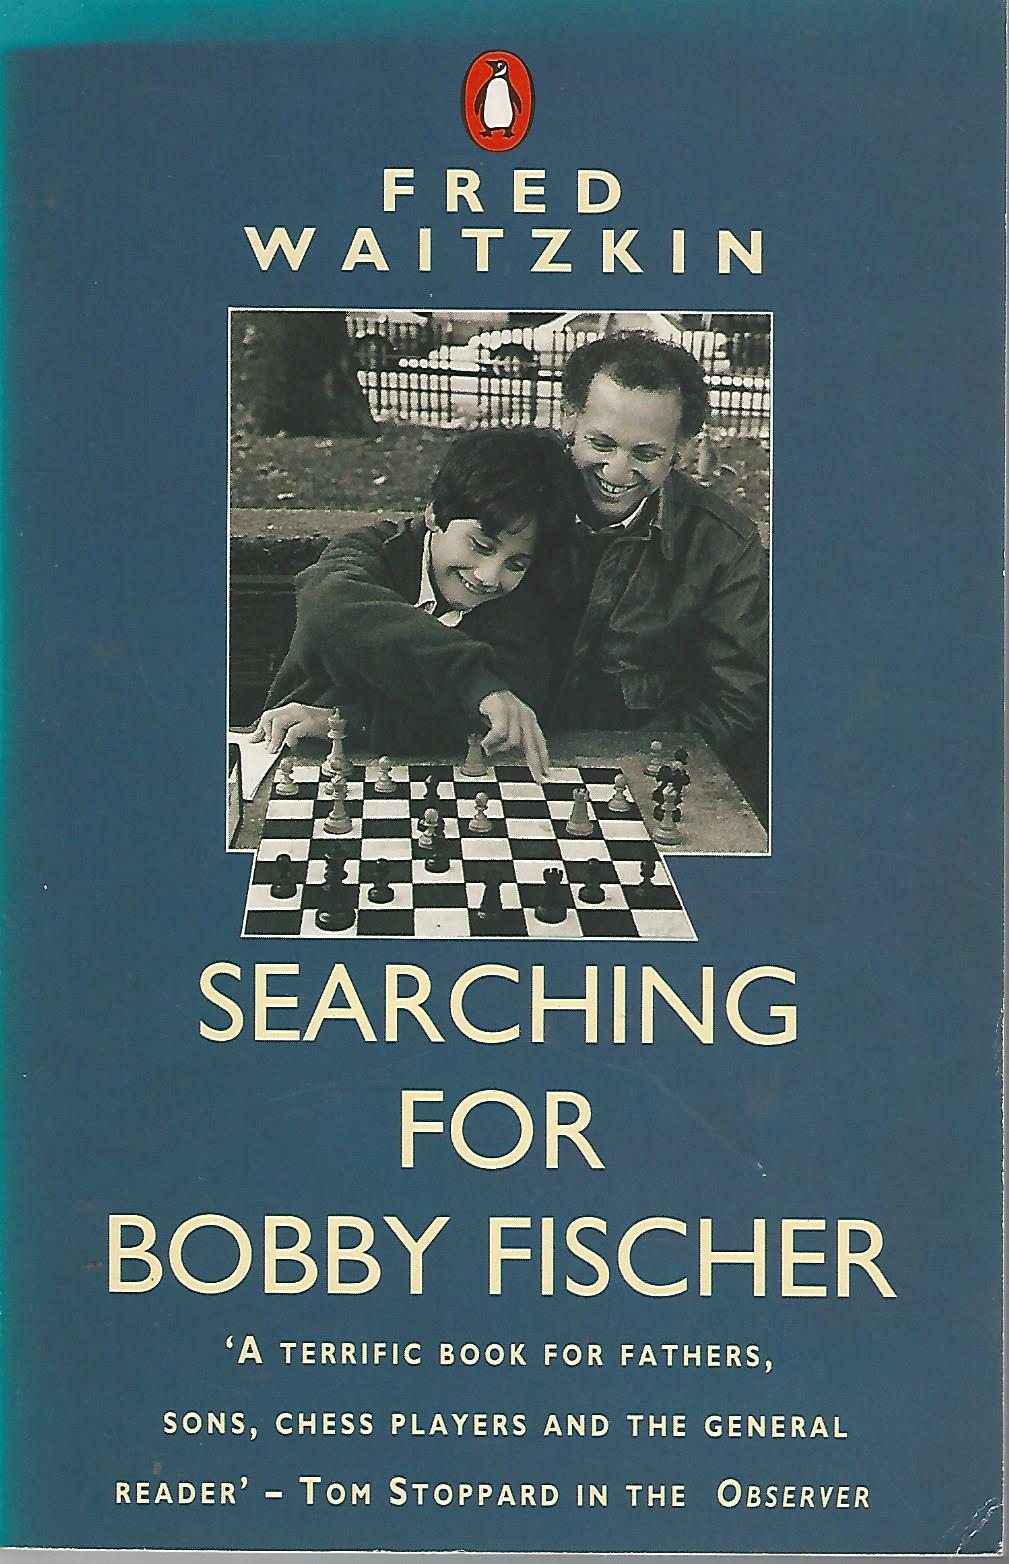 Waitzkin, Fred - Searching for Bobby Fischer